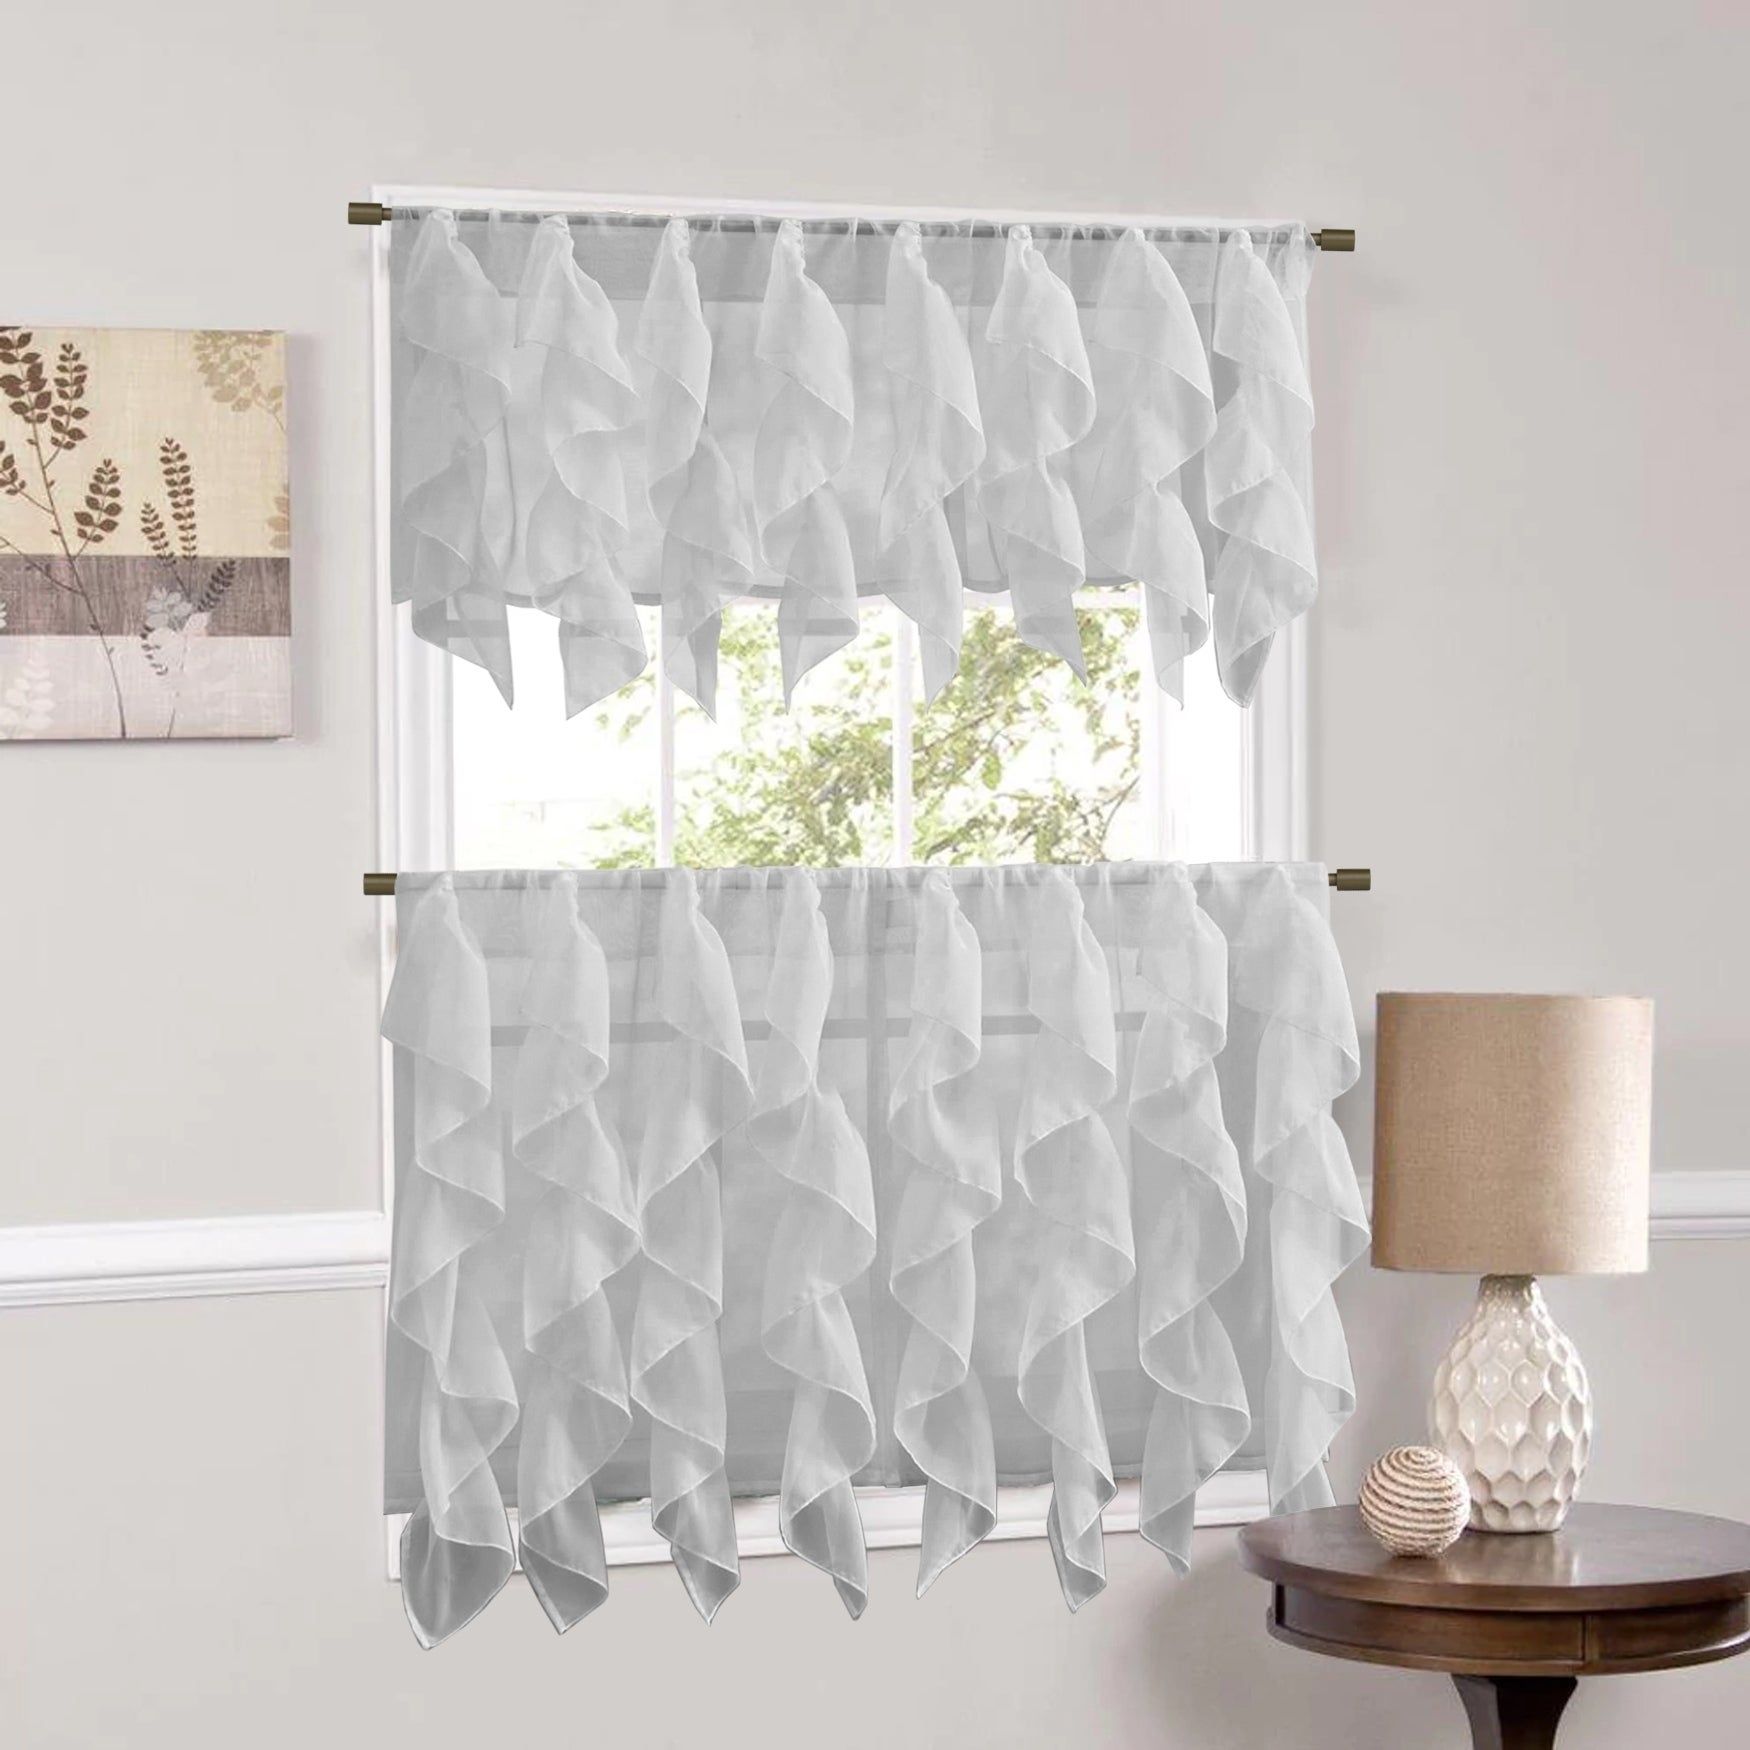 Sweet Home Collection Silver Vertical Ruffled Waterfall Valance And Curtain  Tiers Inside Navy Vertical Ruffled Waterfall Valance And Curtain Tiers (View 3 of 20)